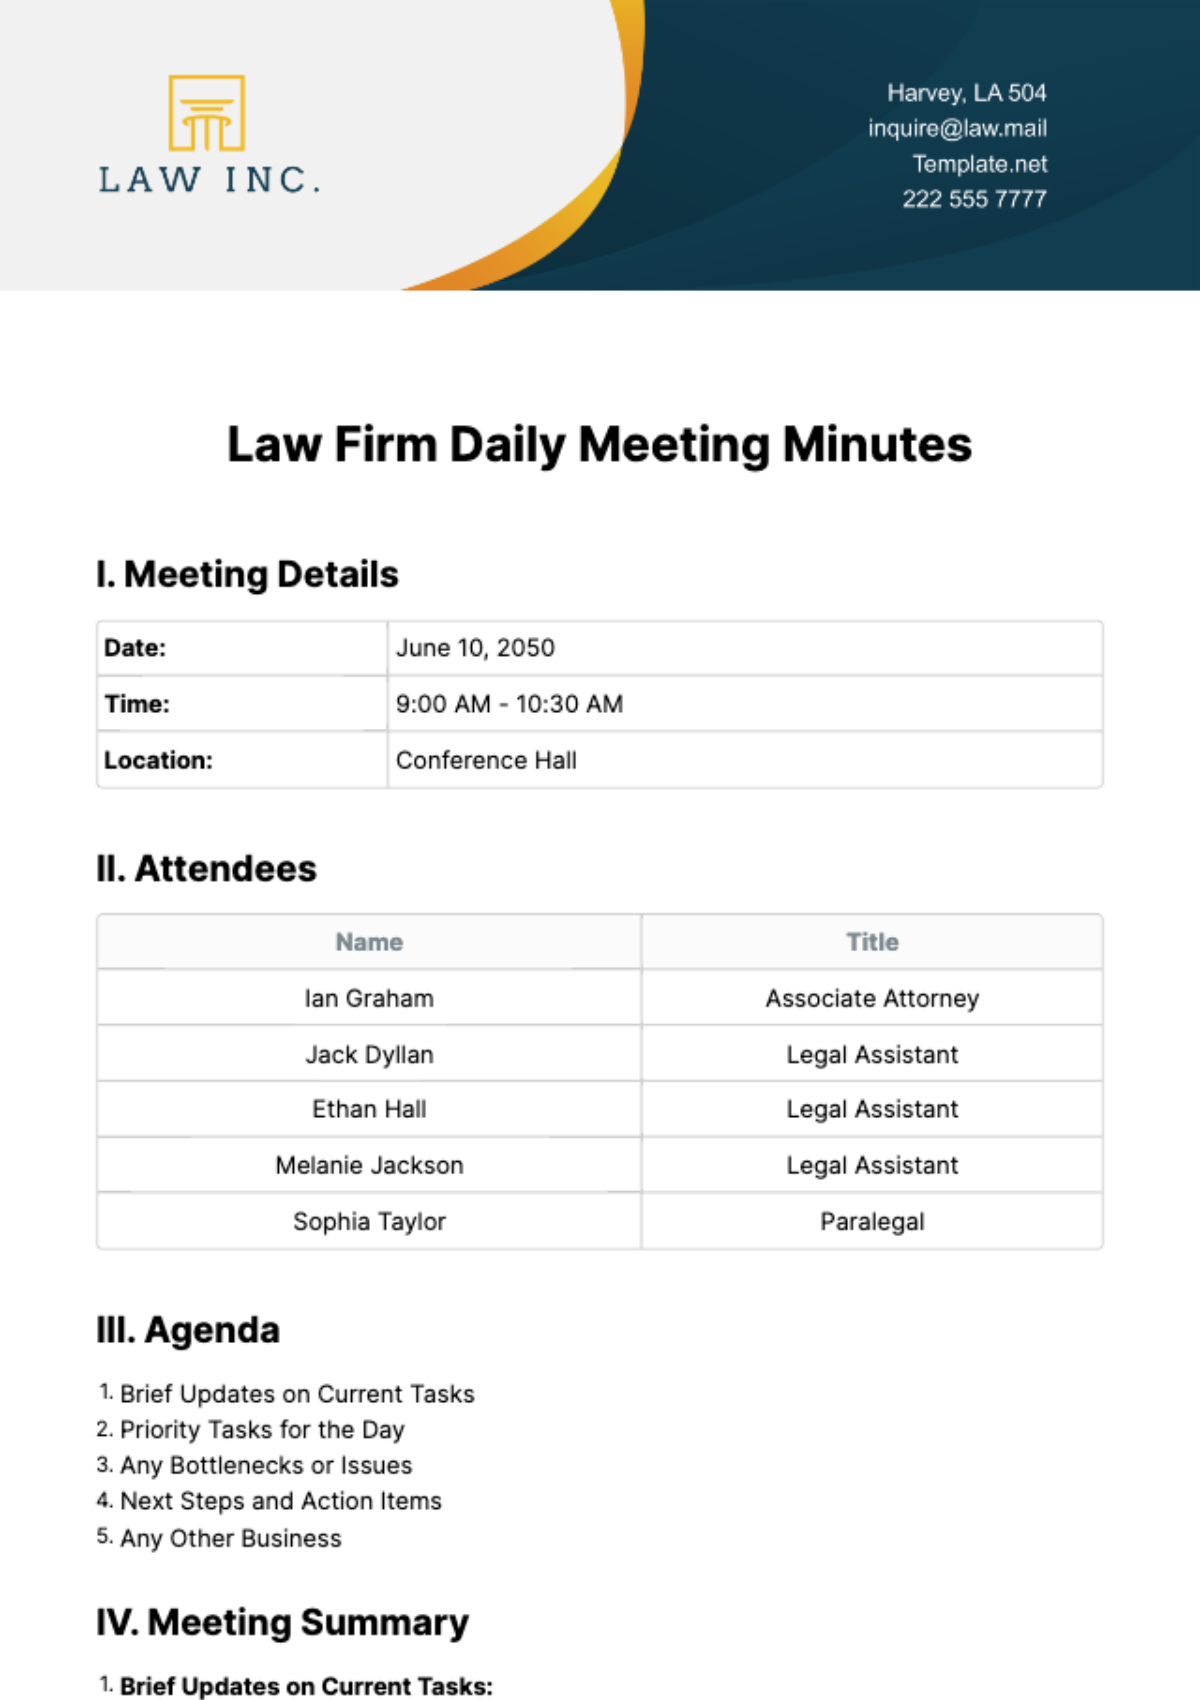 Law Firm Daily Meeting Minutes Template